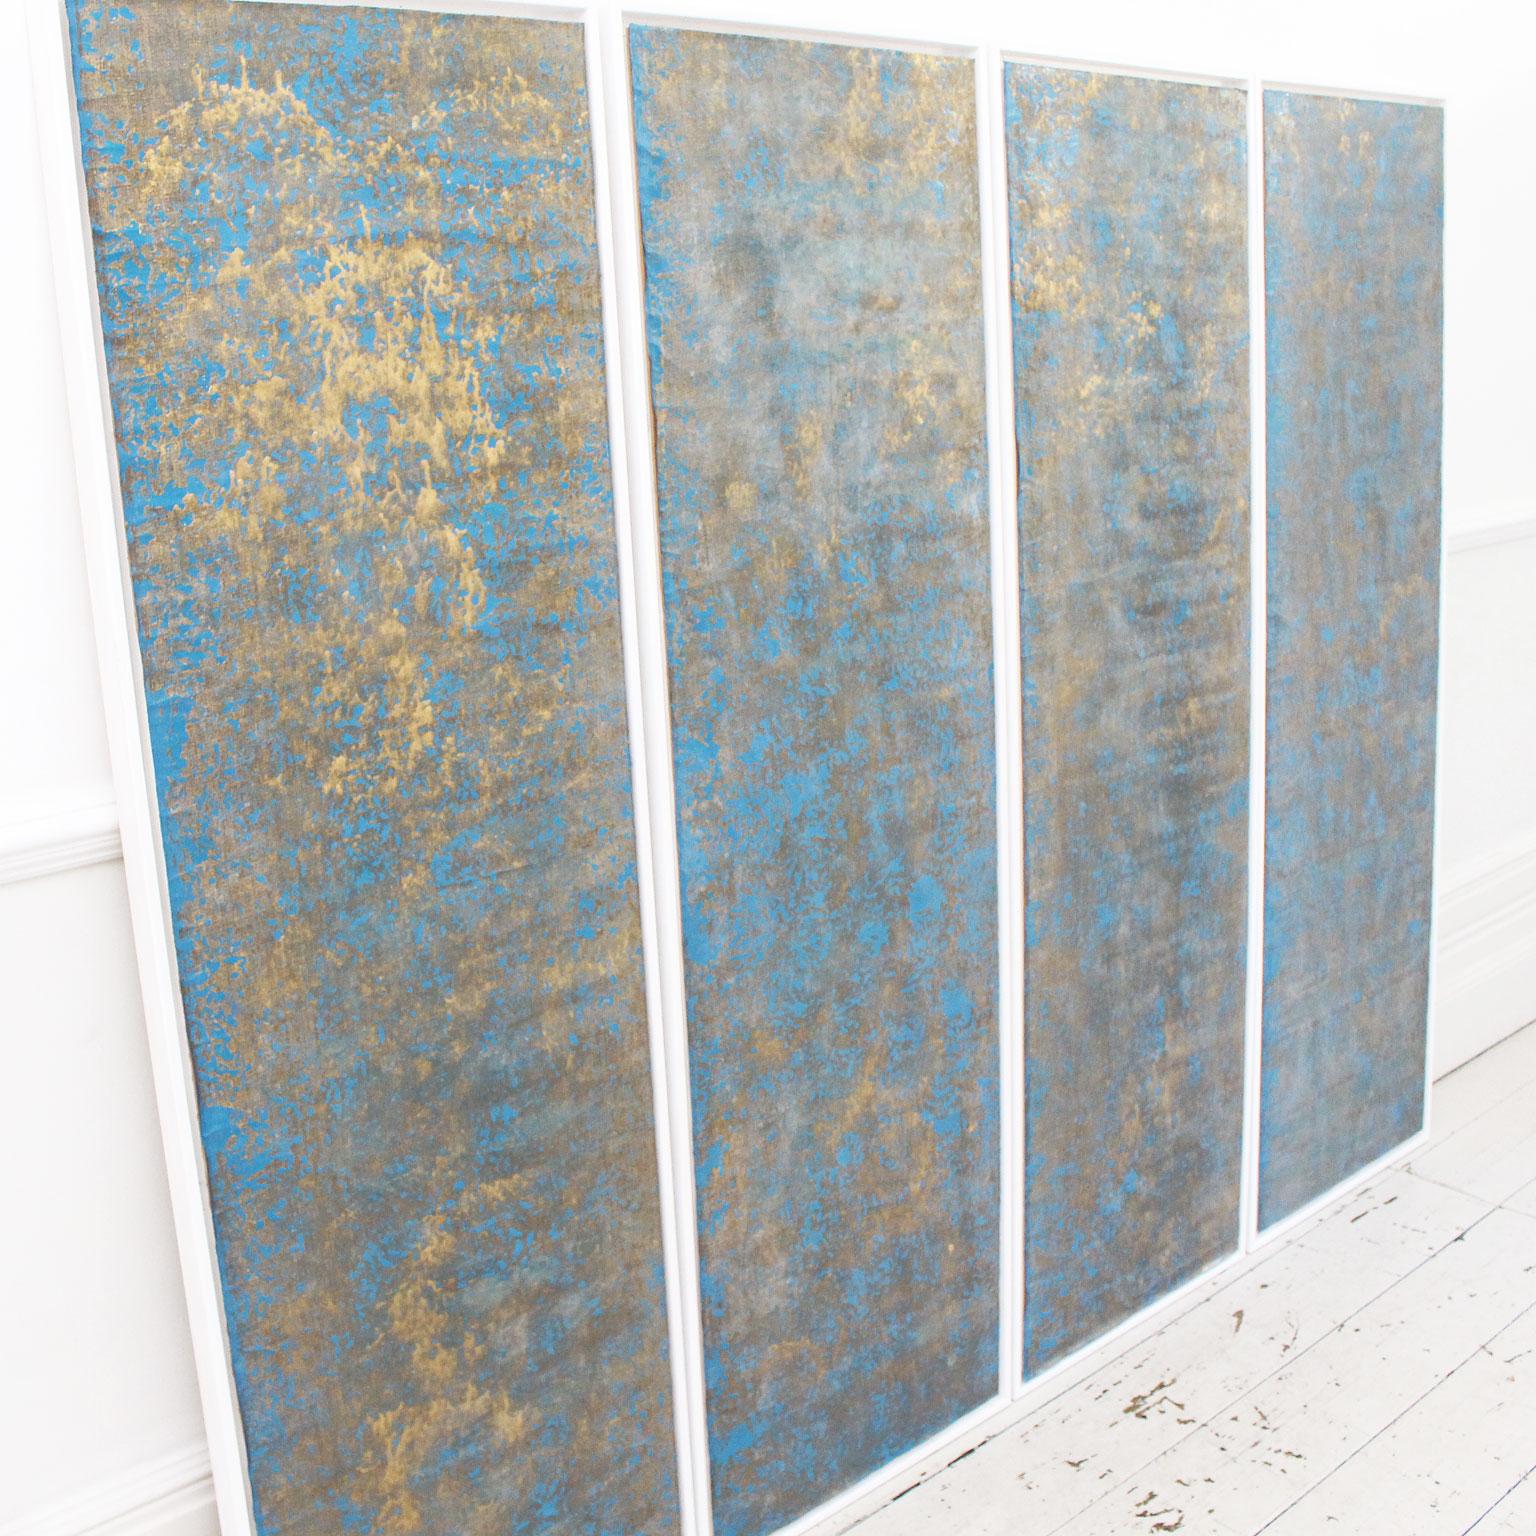 Whilst these look like modern art, these panels are unbelievably 18th century handcrafted fabric wall coverings. The fabric has been laminated in blue and then hand gilded in a muted gold. We have had them newly framed in a contemporary style. We